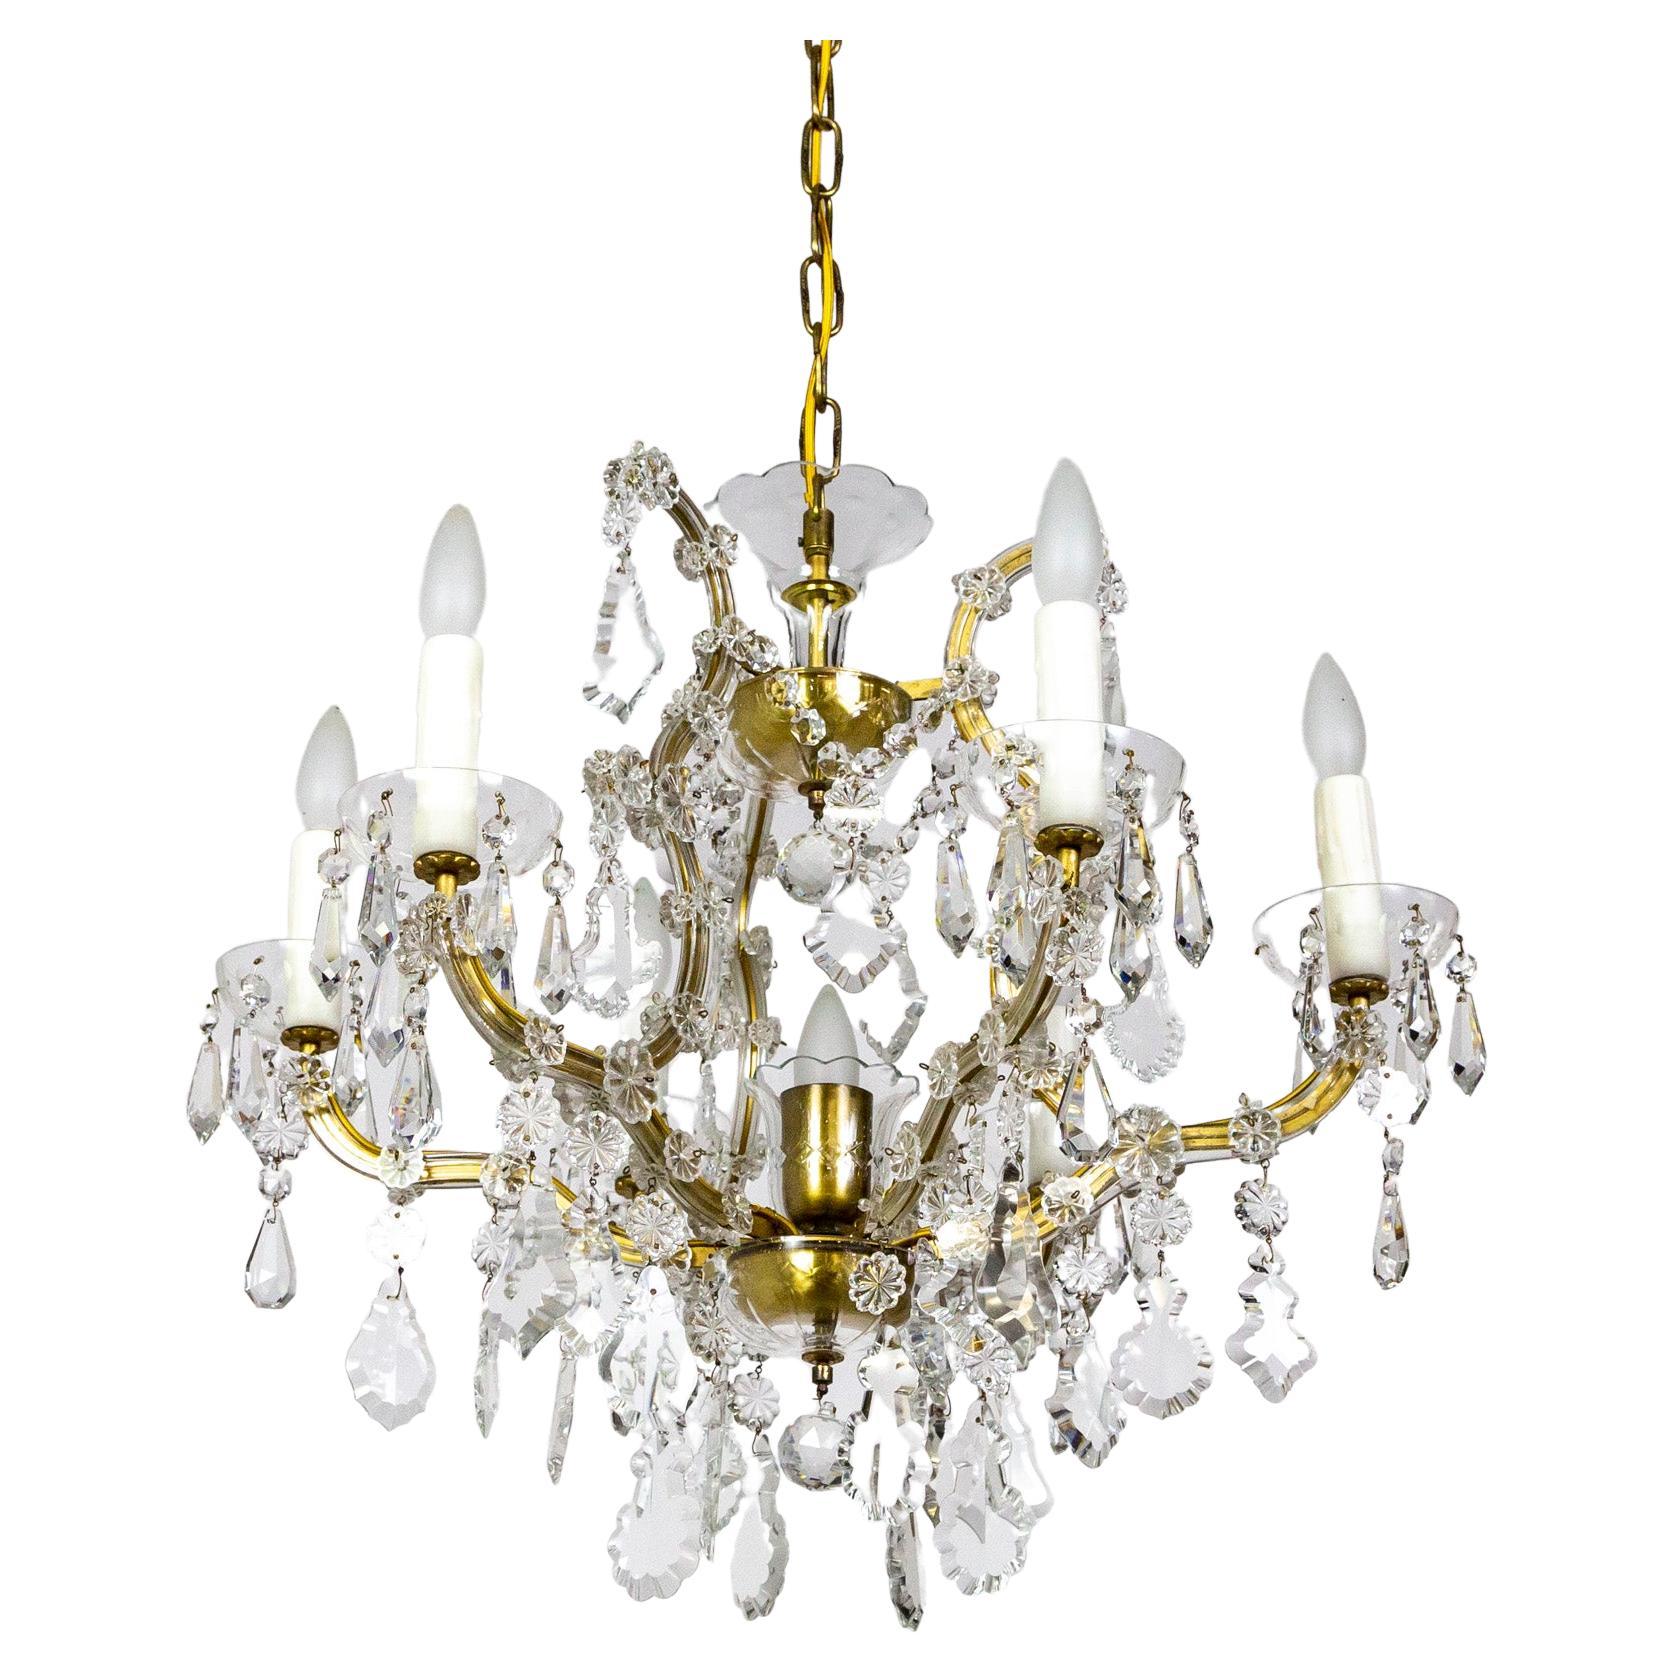 7-Light Multi-Crystal Maria Theresa Chandelier For Sale